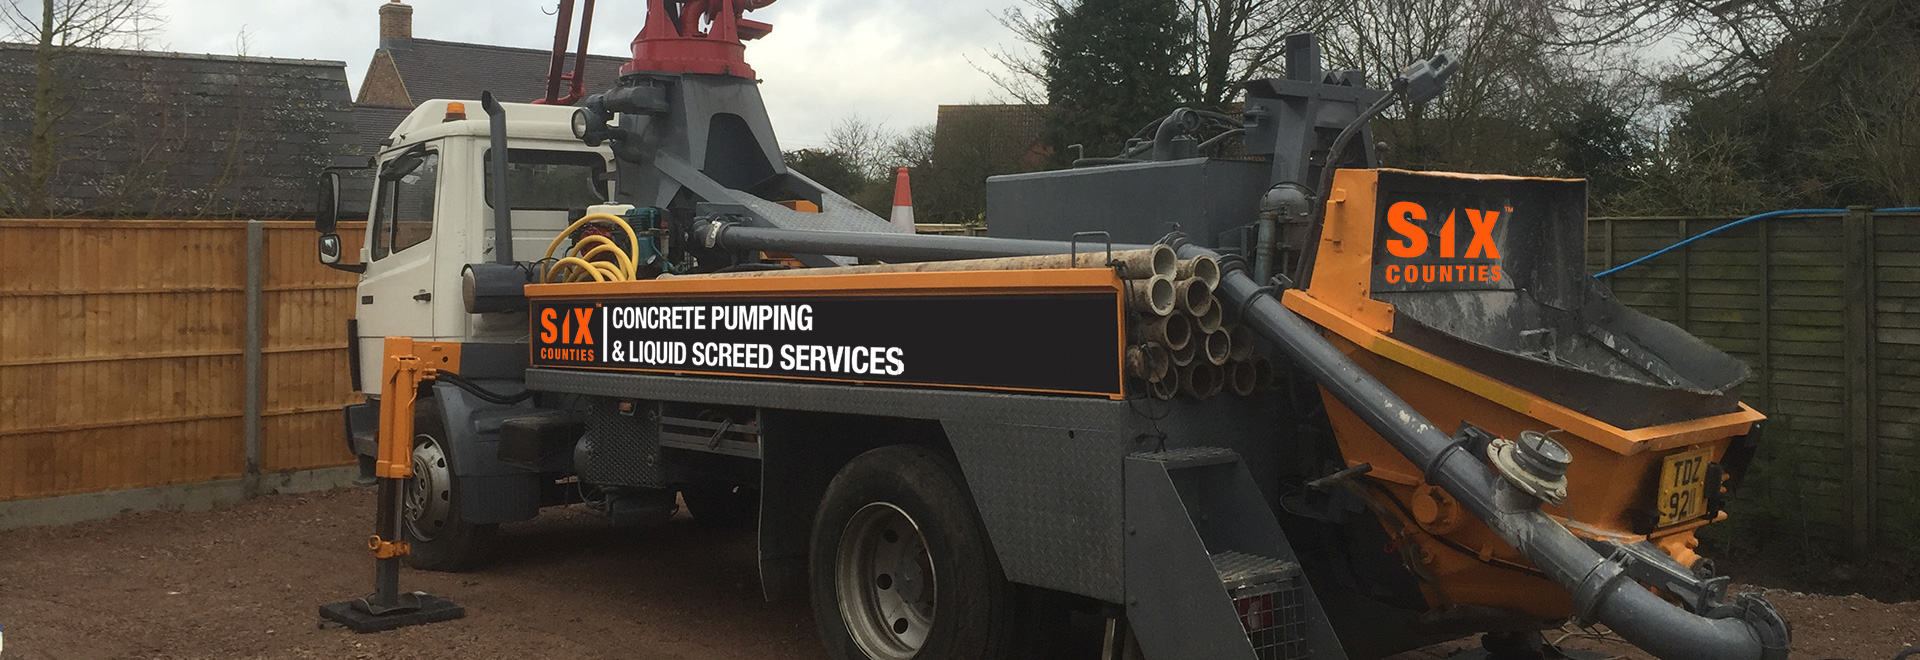 Six Counties Concrete Pumping 